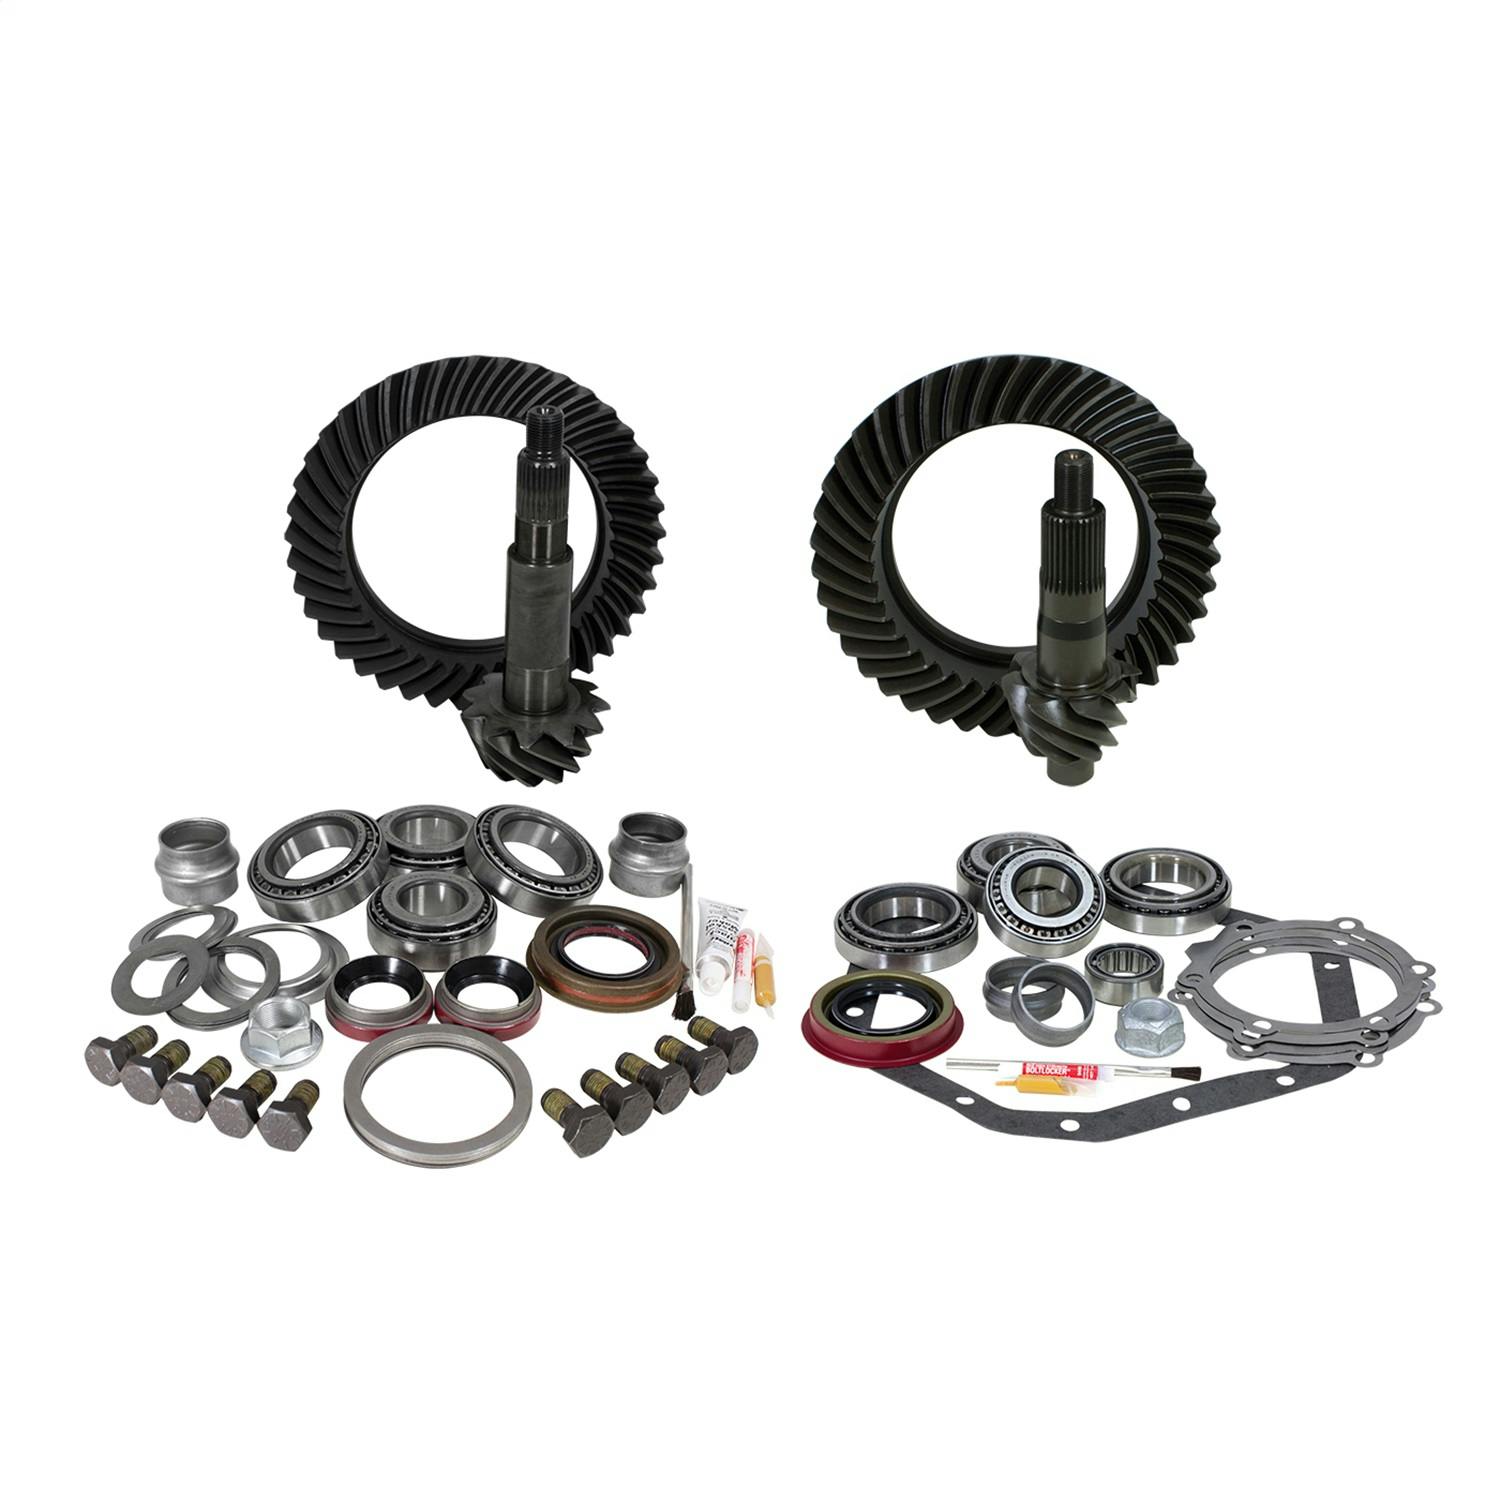 USA Standard Gear ZGK045 Ring And Pinion Set And Complete Install Kit